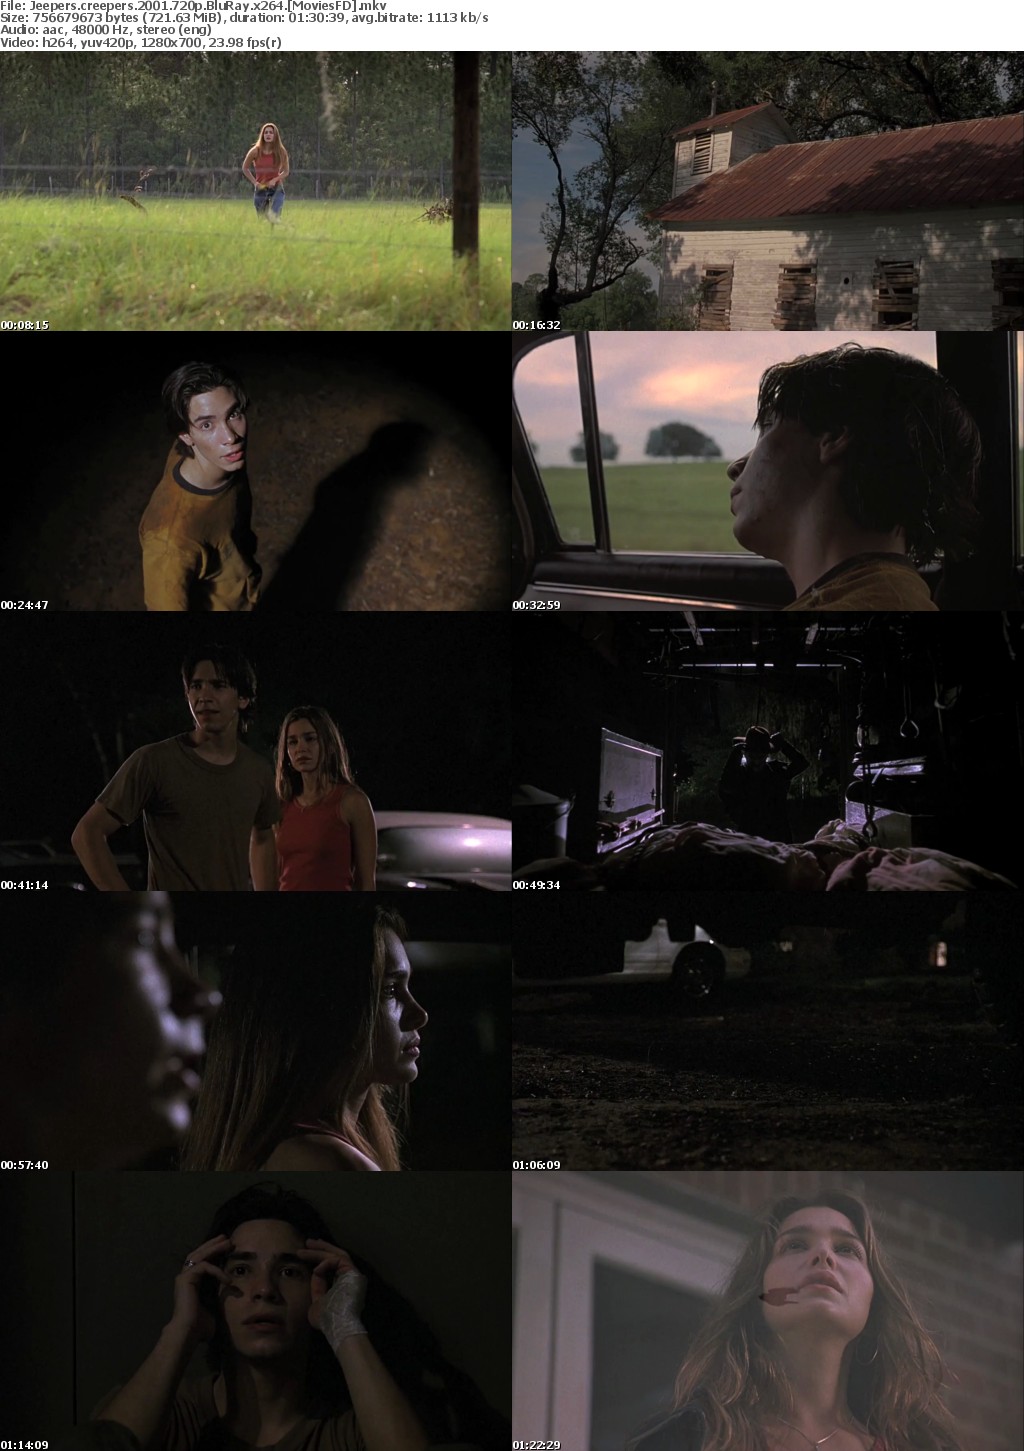 Jeepers Creepers (2001) 720P Bluray X264 Moviesfd